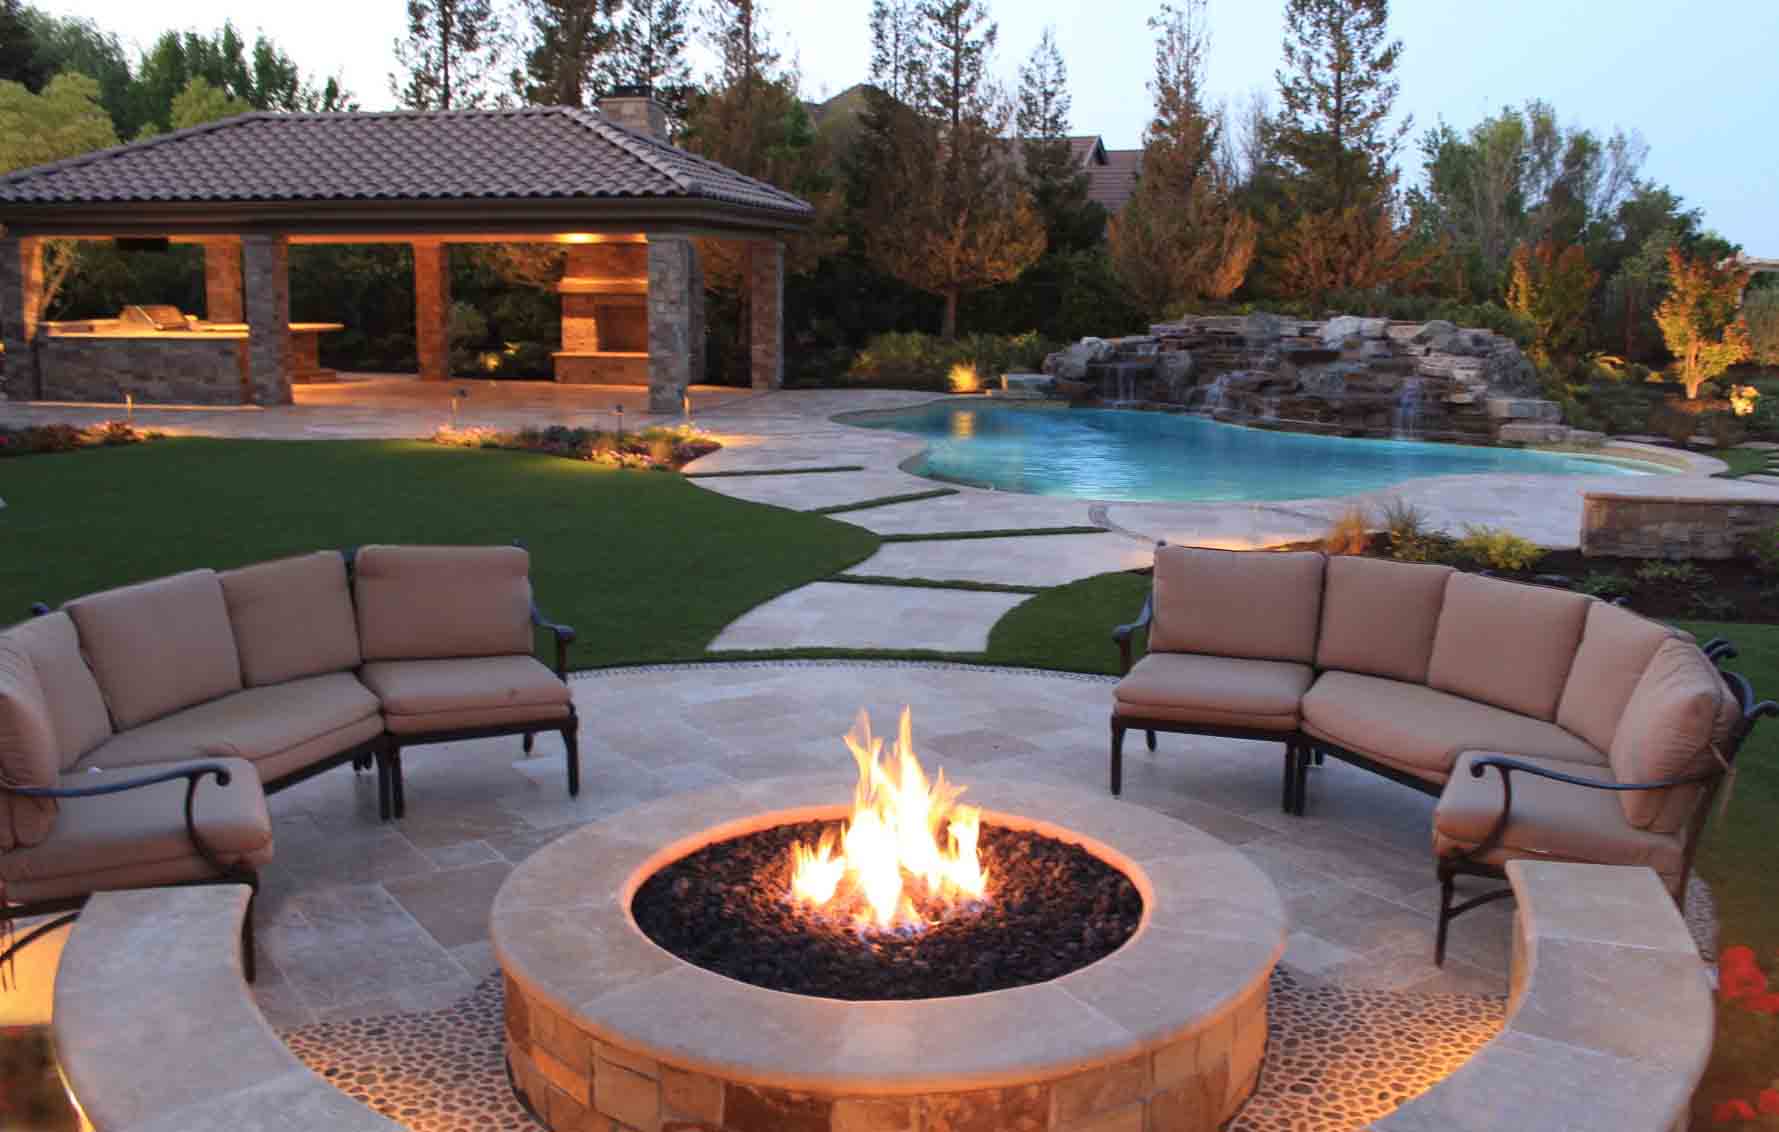 Photo gallery divided into the different parts of the landscape including Overall Design, Plant Design, Pool Design, Pool Remodels, Outdoor Fireplaces & Kitchens, Before & Afters, & Details.